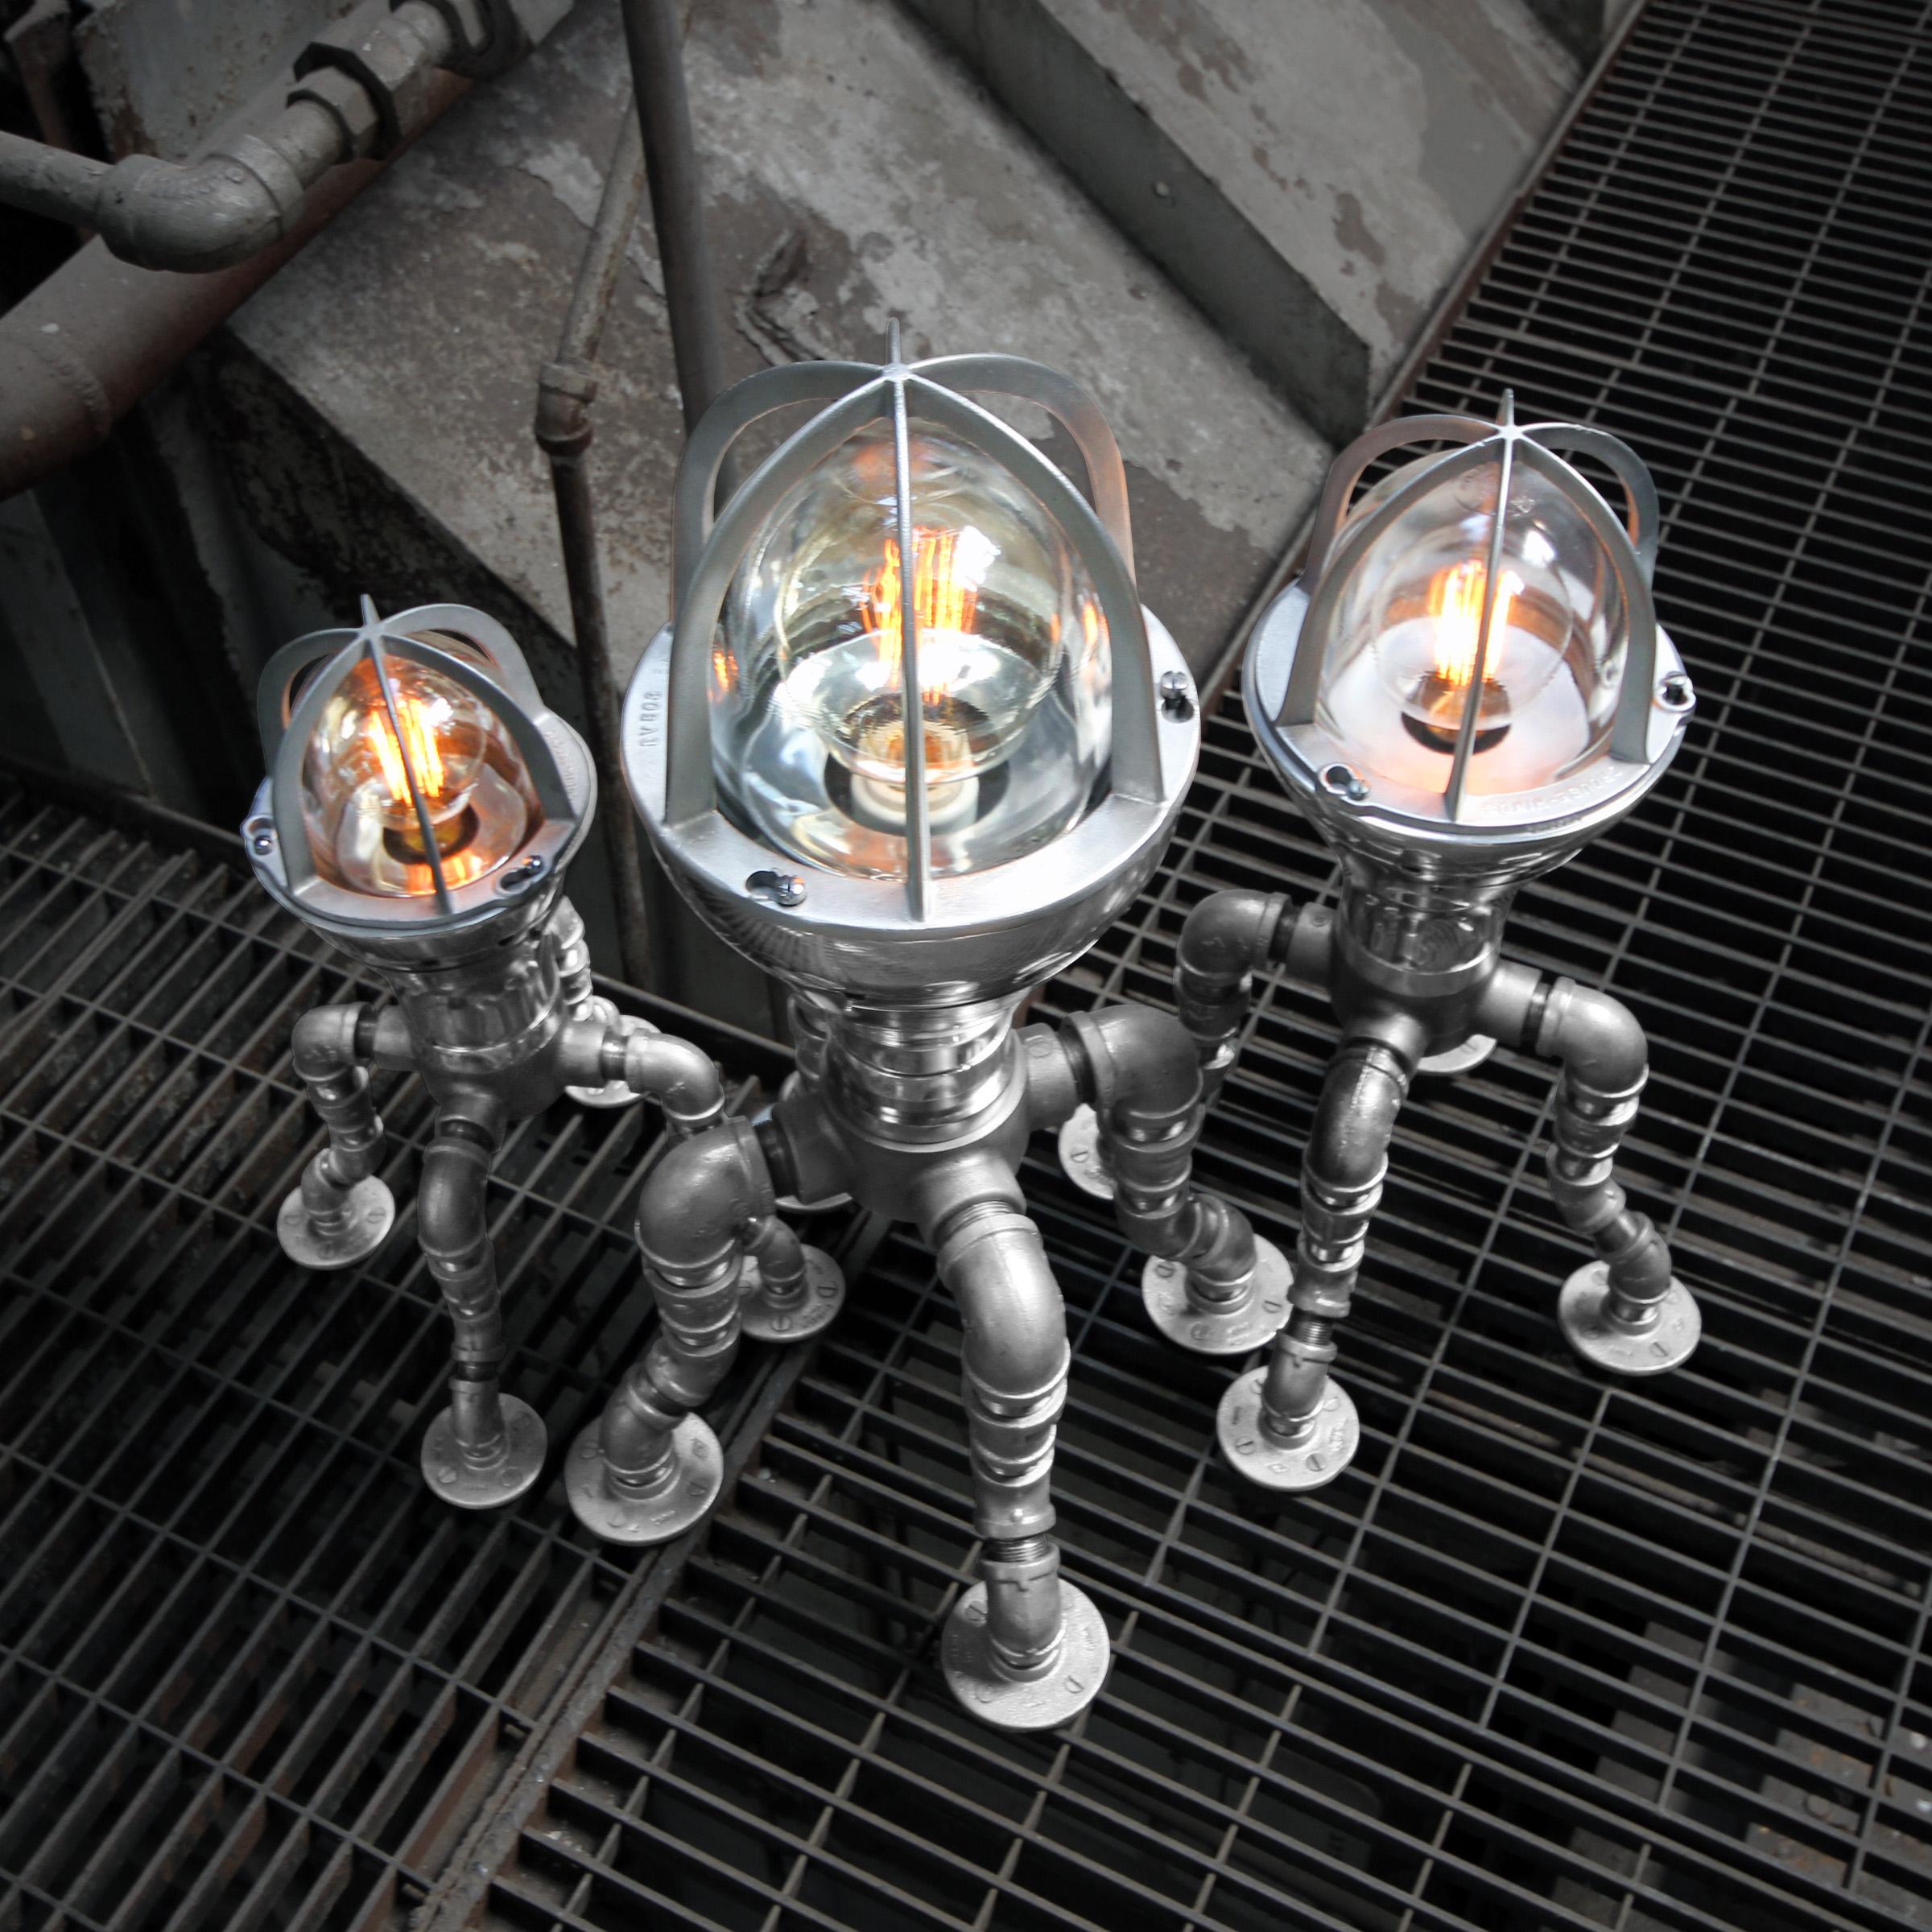 American Modern Industrial Lamp Set - Industrial Decor - Crouse Hinds Industrial Light For Sale